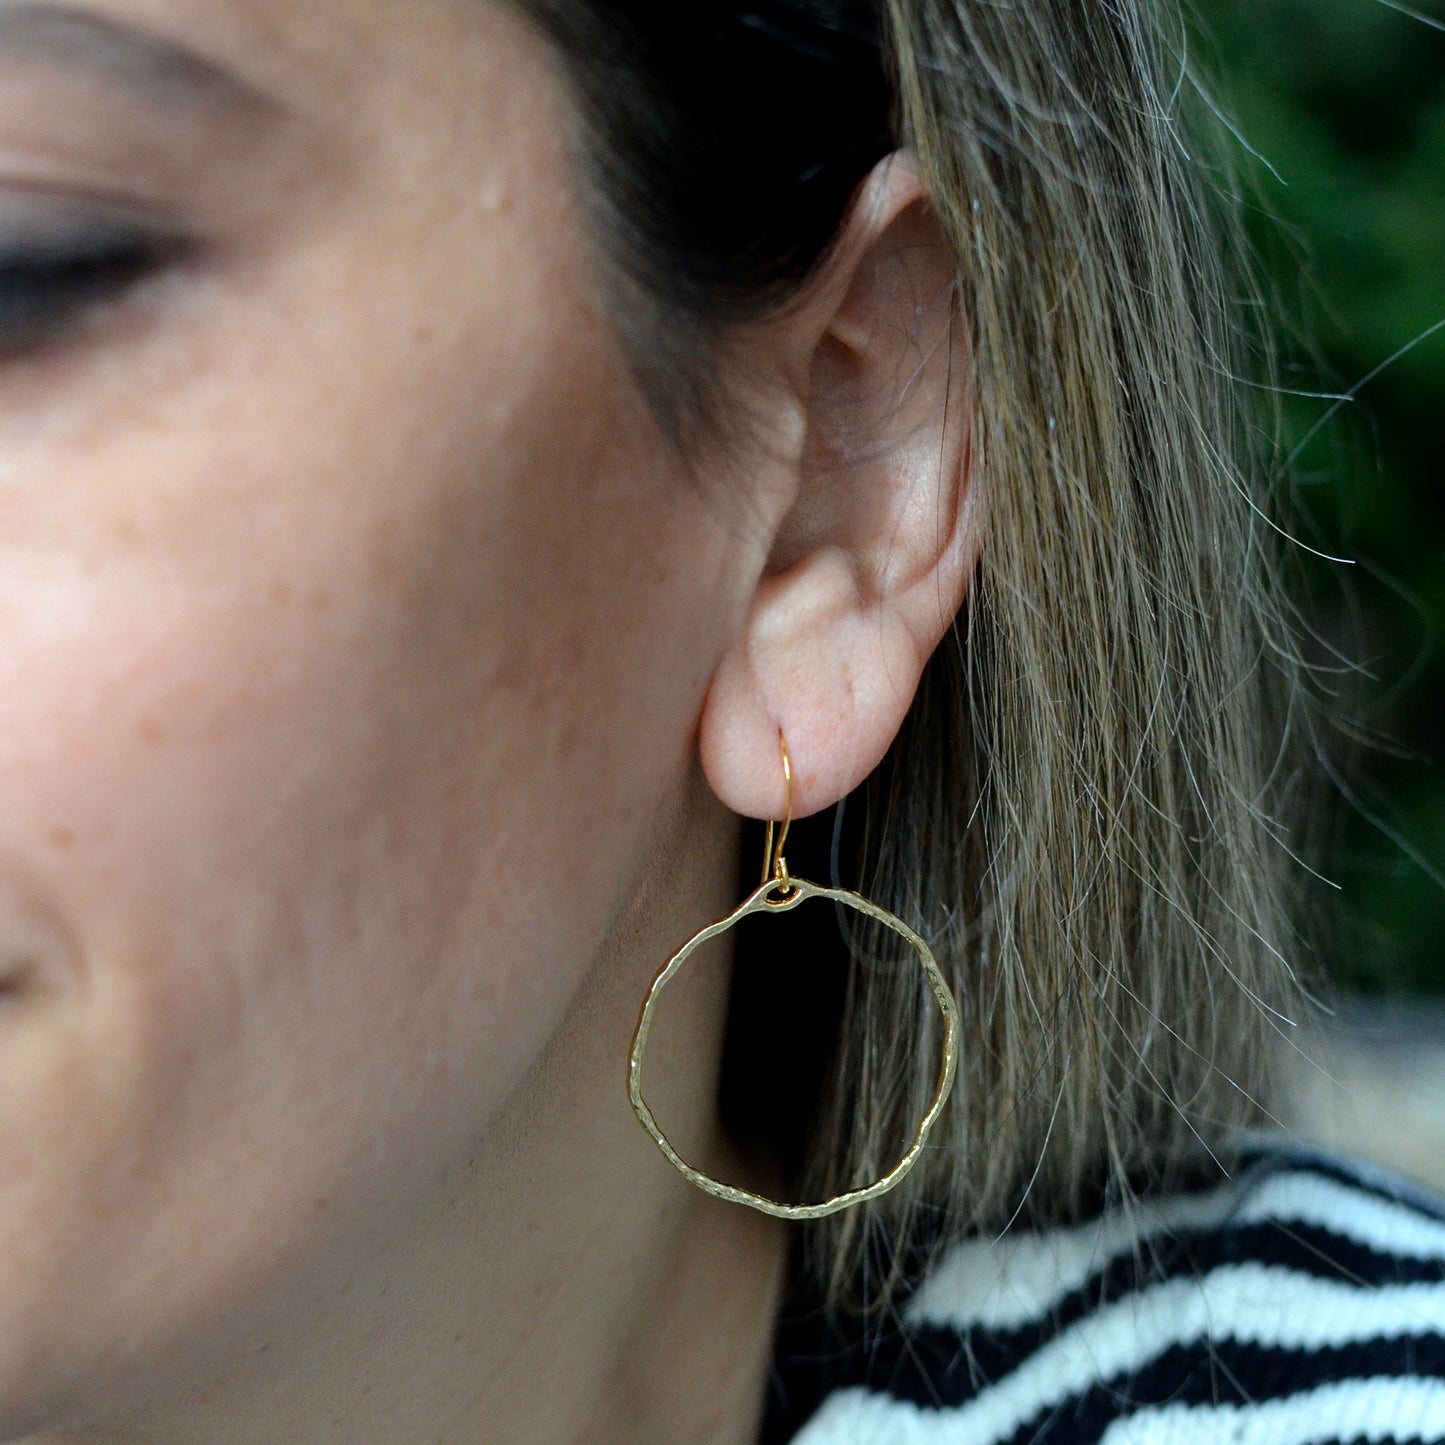 Textured Hoops - Shiny Gold + Silver